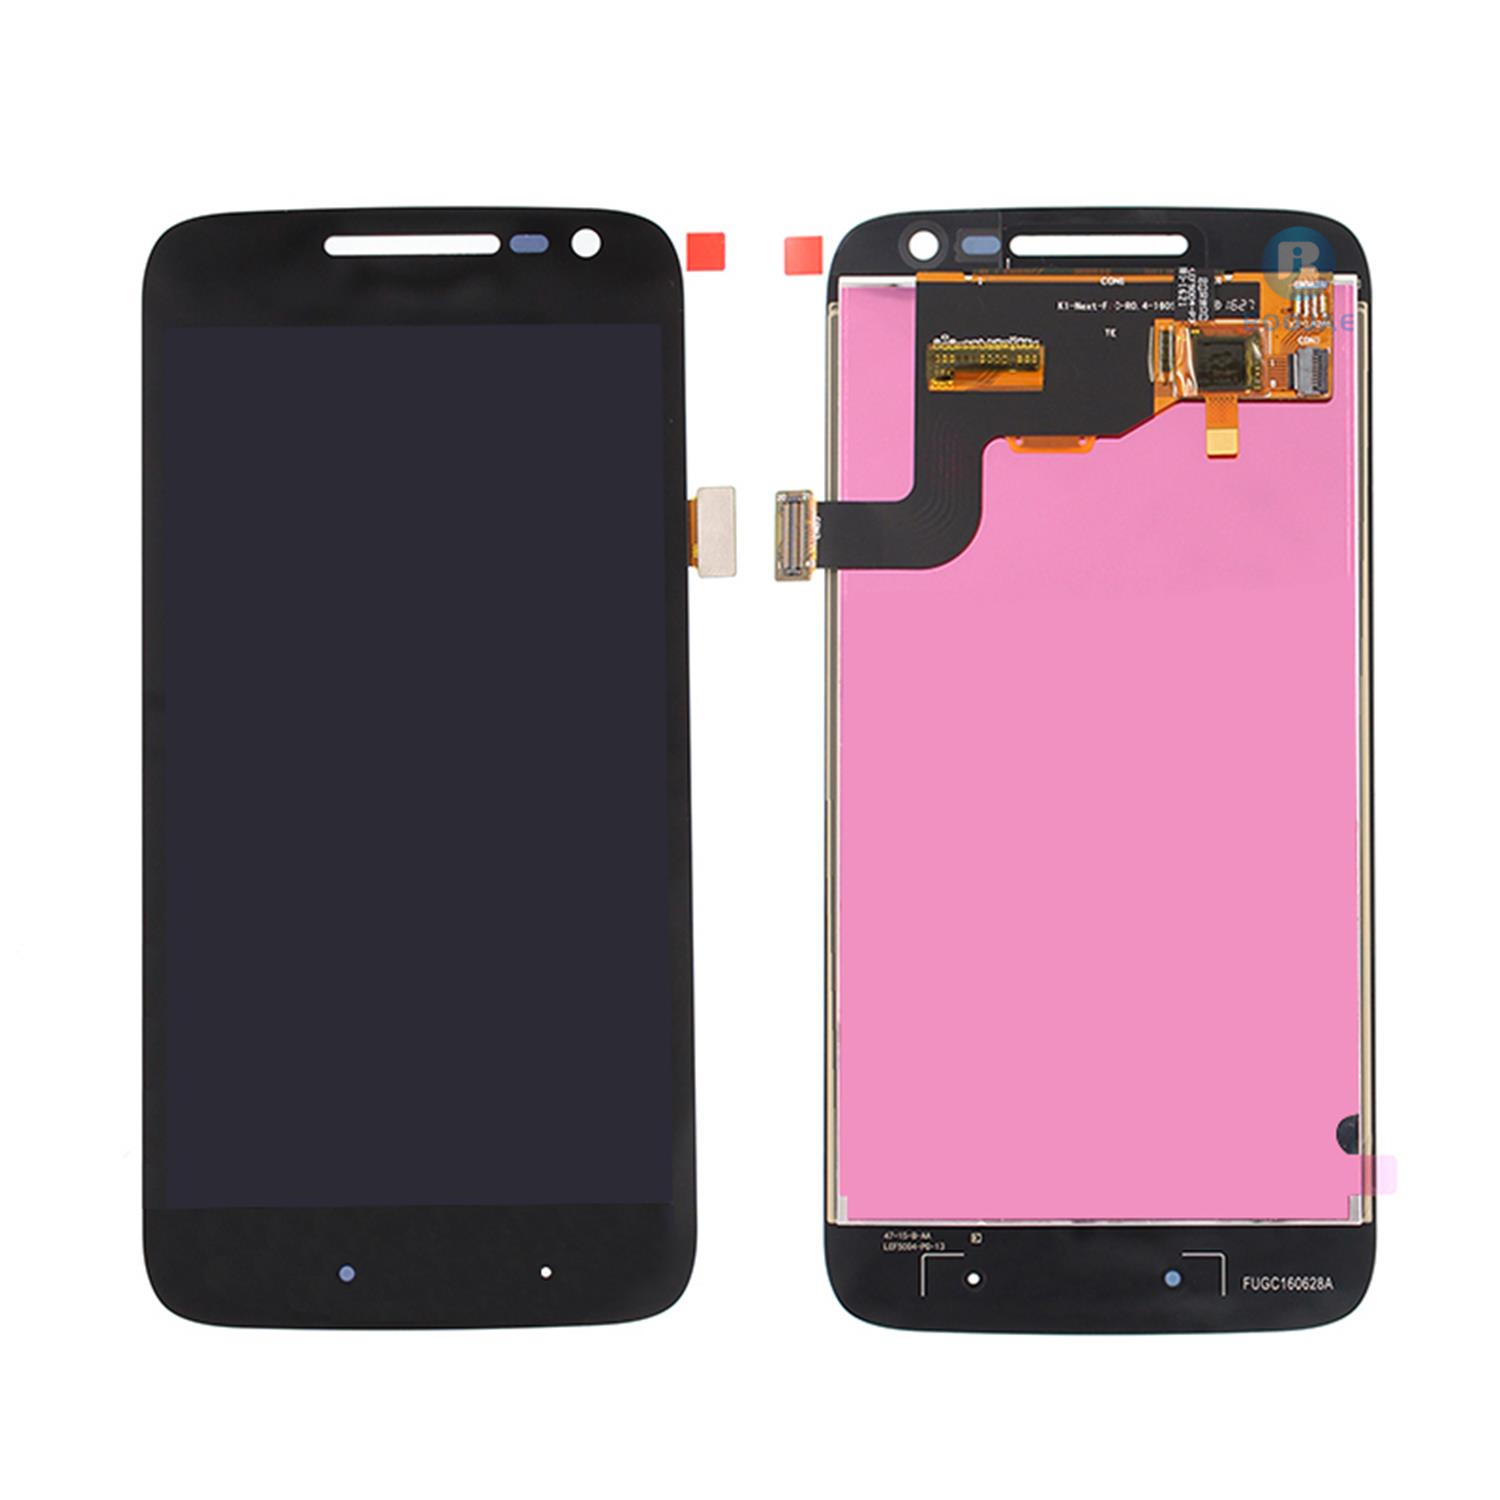 For Motorola Moto G4 Play LCD Screen Display and Touch Panel Digitizer Assembly Replacement